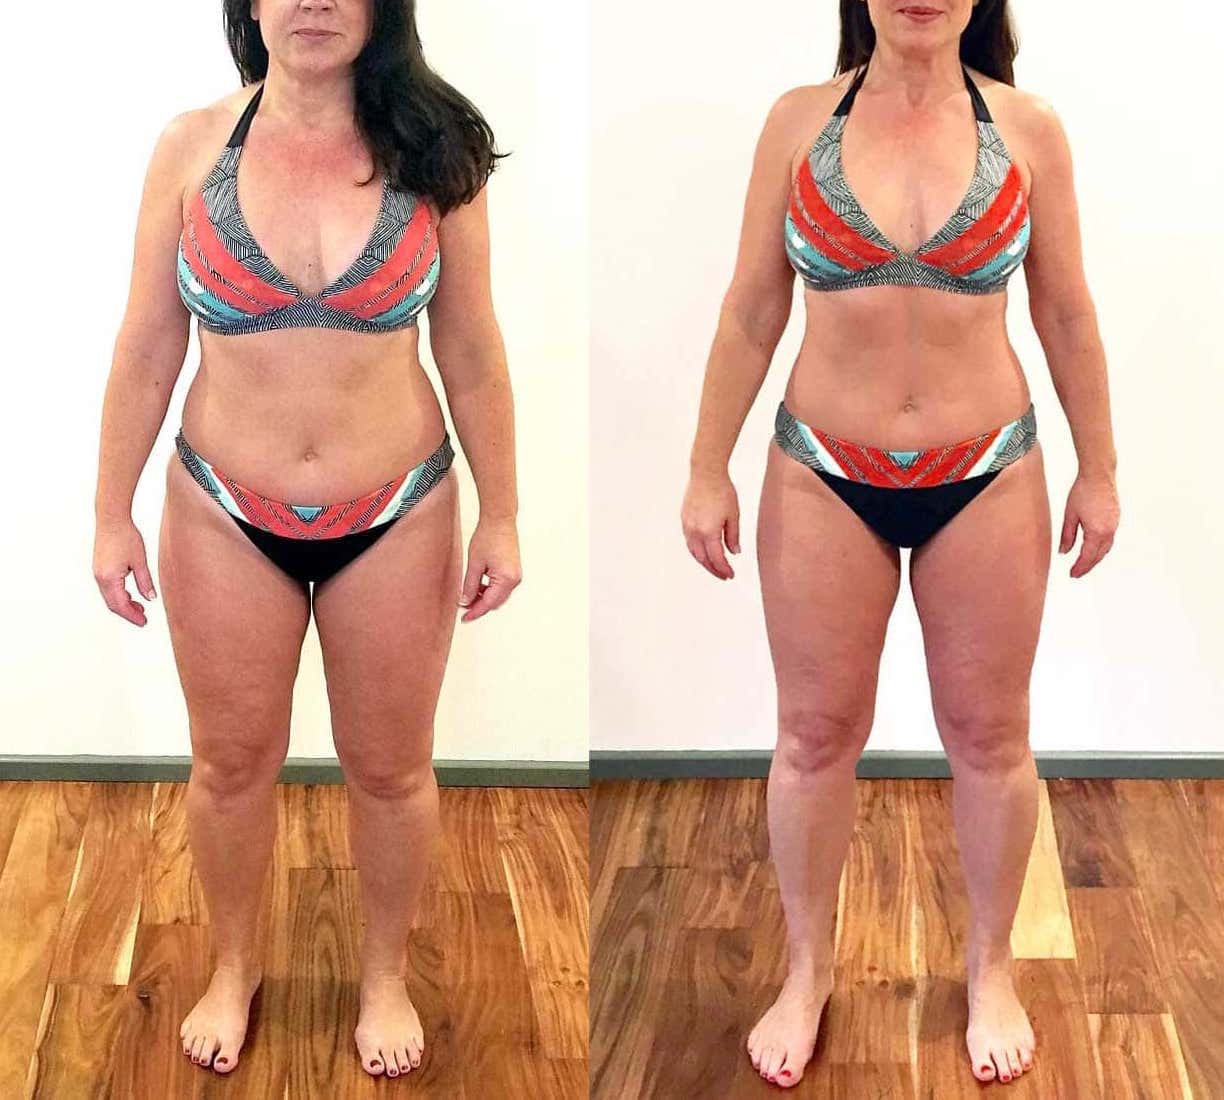 8 Week Weight Loss Transformation Side by Side